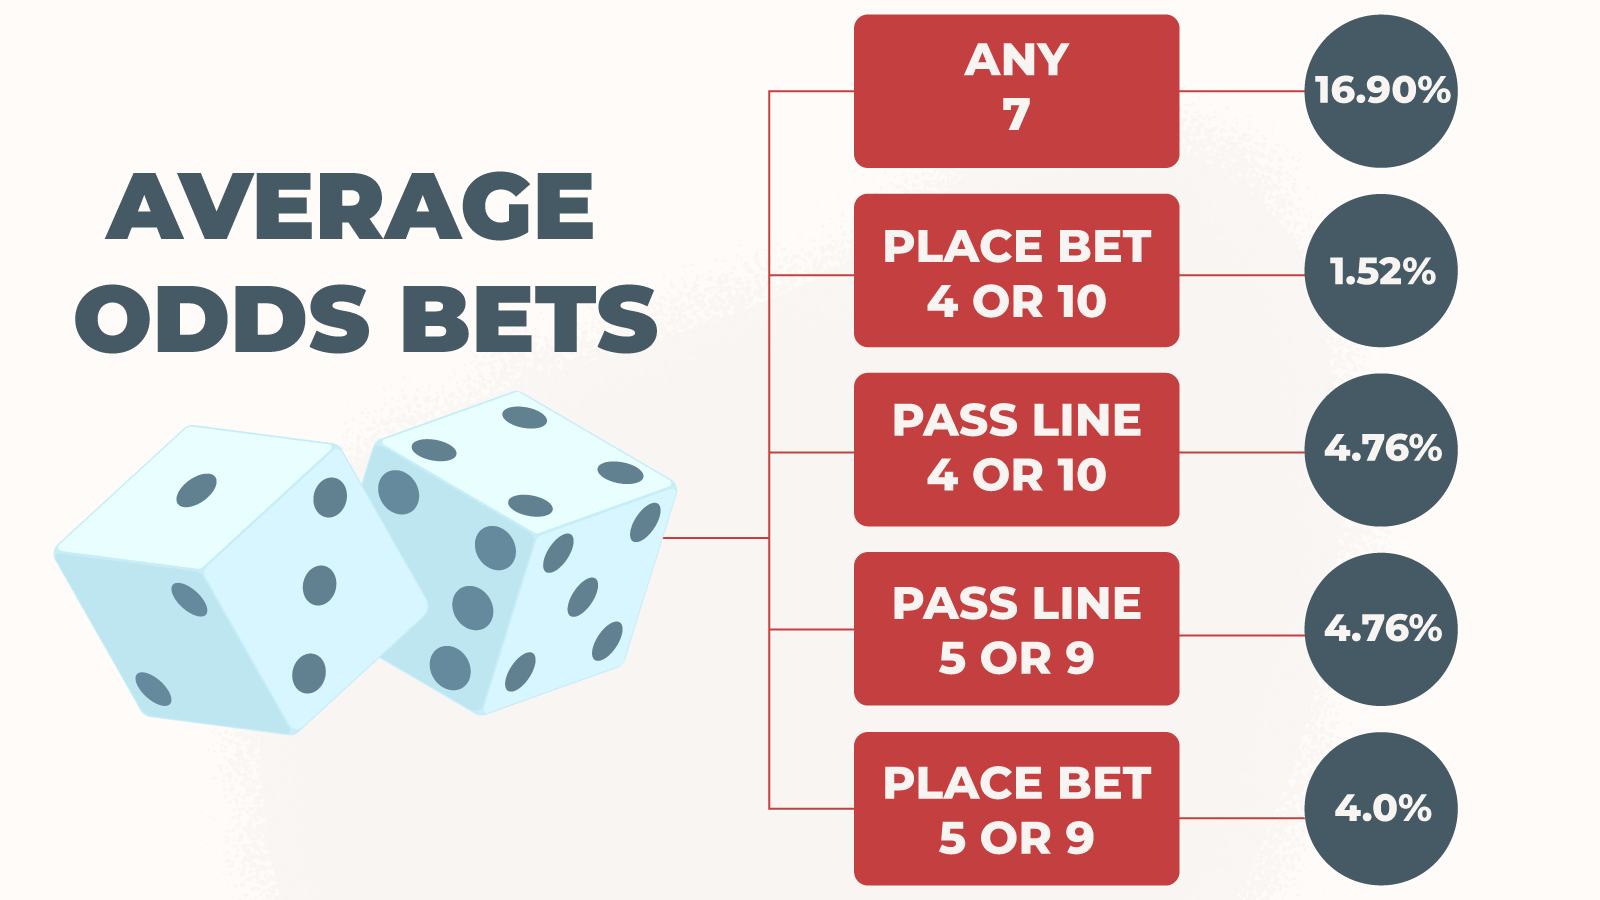 Craps Bets with Average Odds